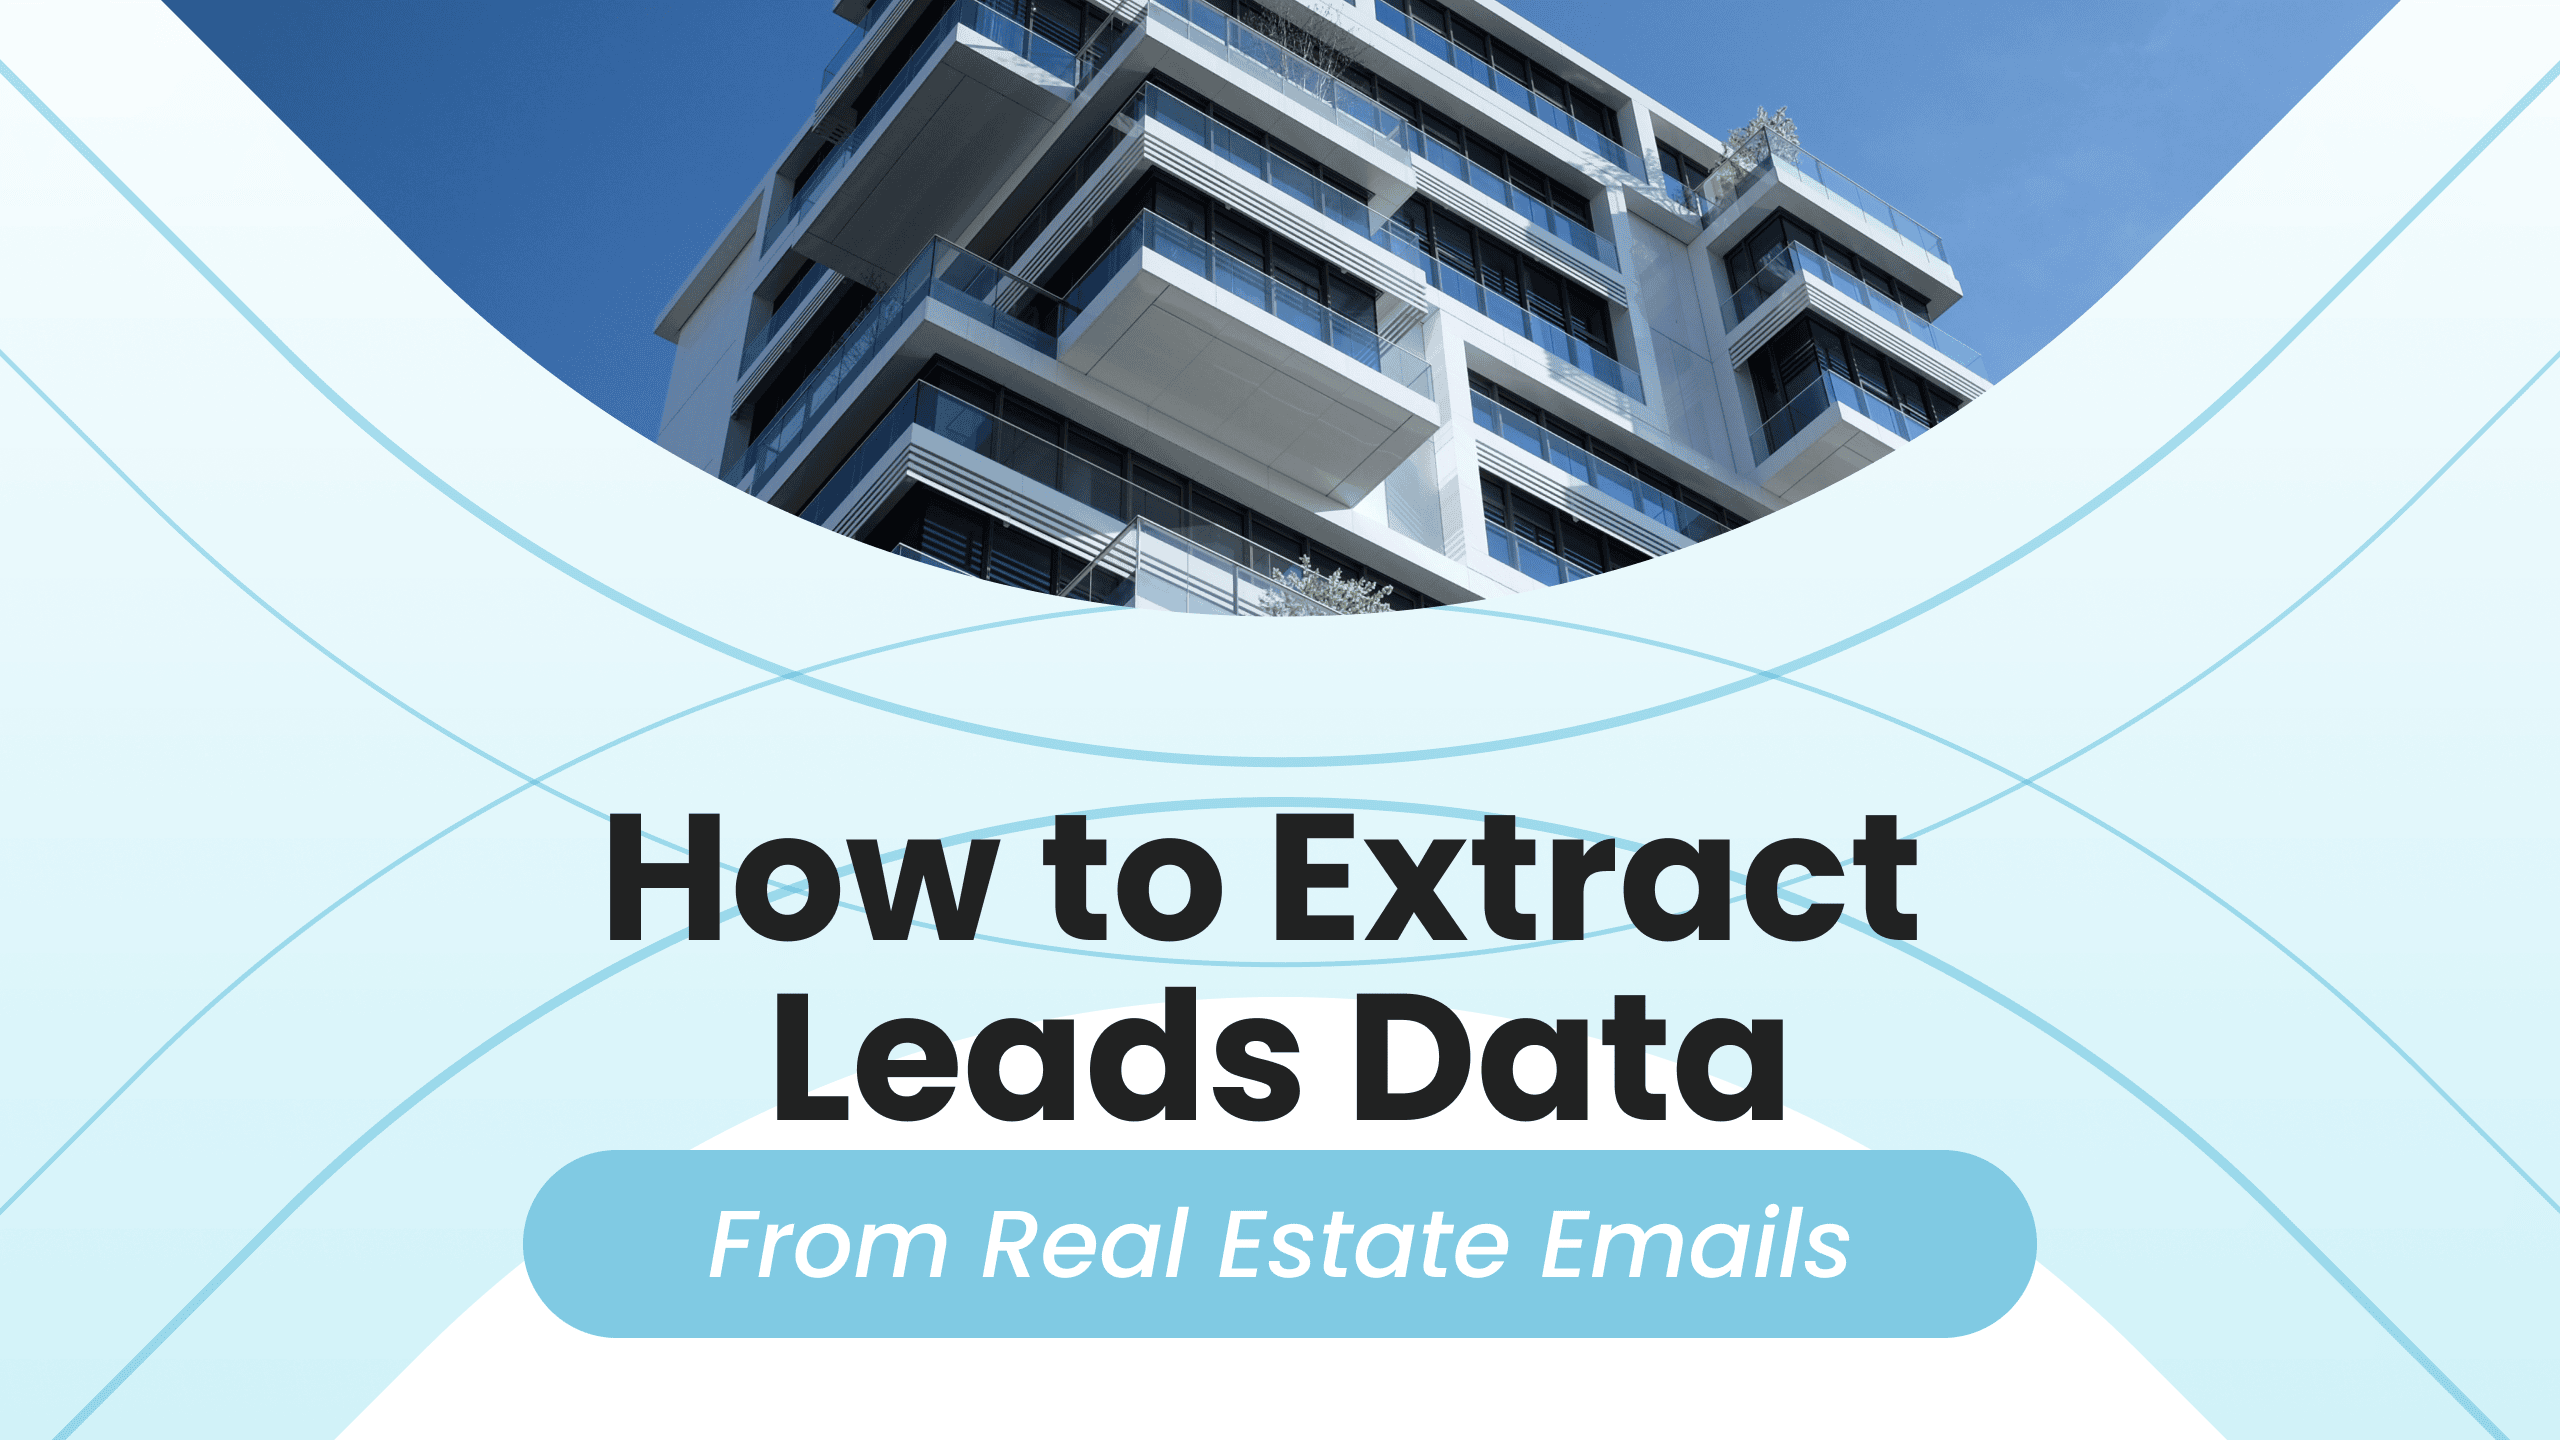 How to Extract Leads Data From Real Estate Emails